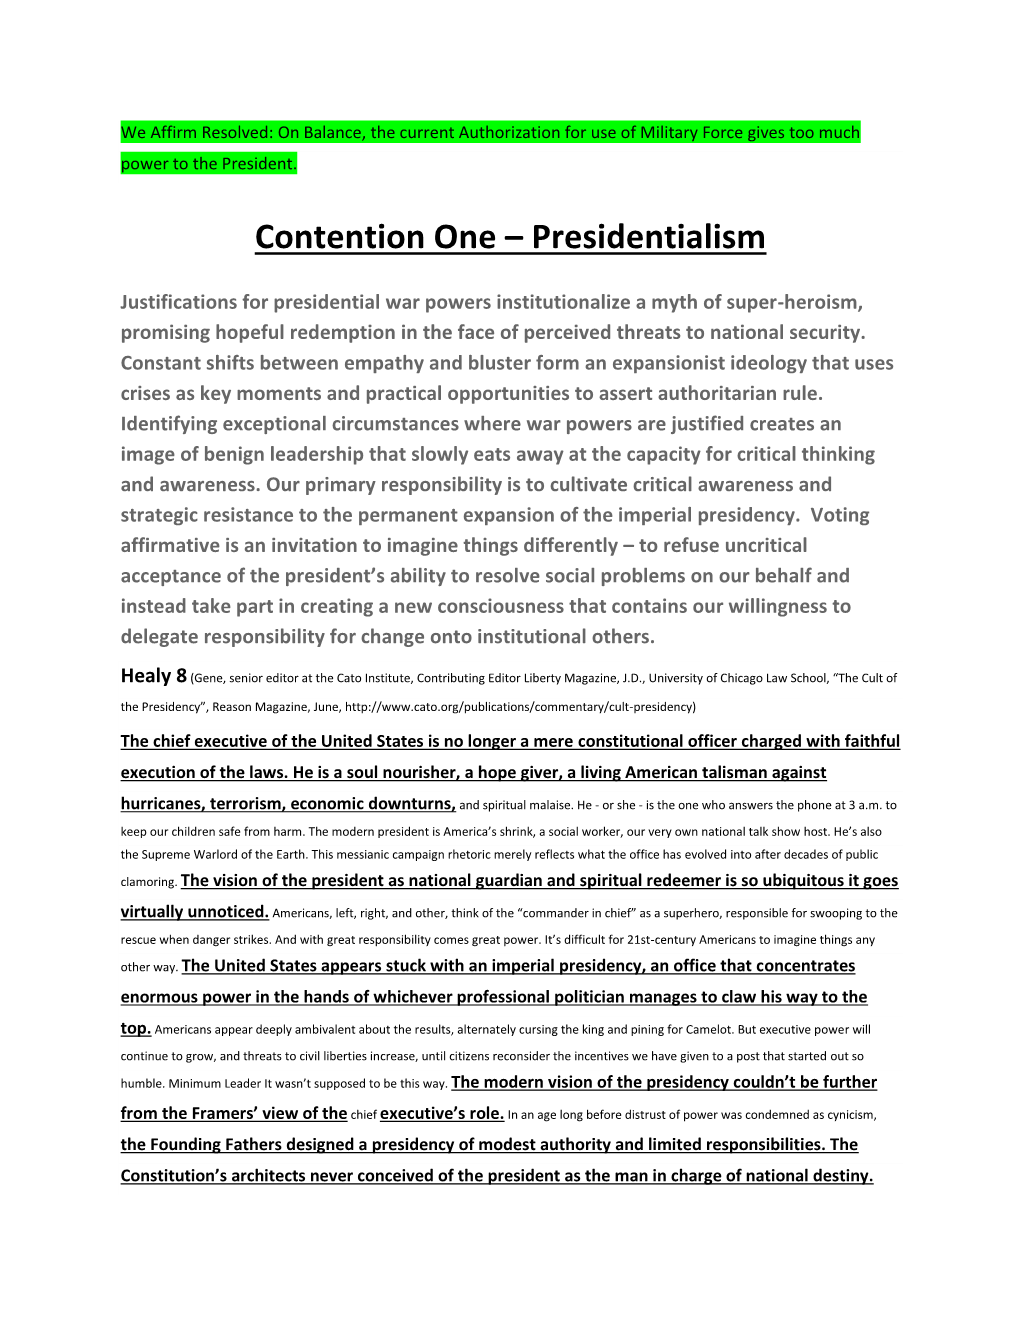 Contention One – Presidentialism